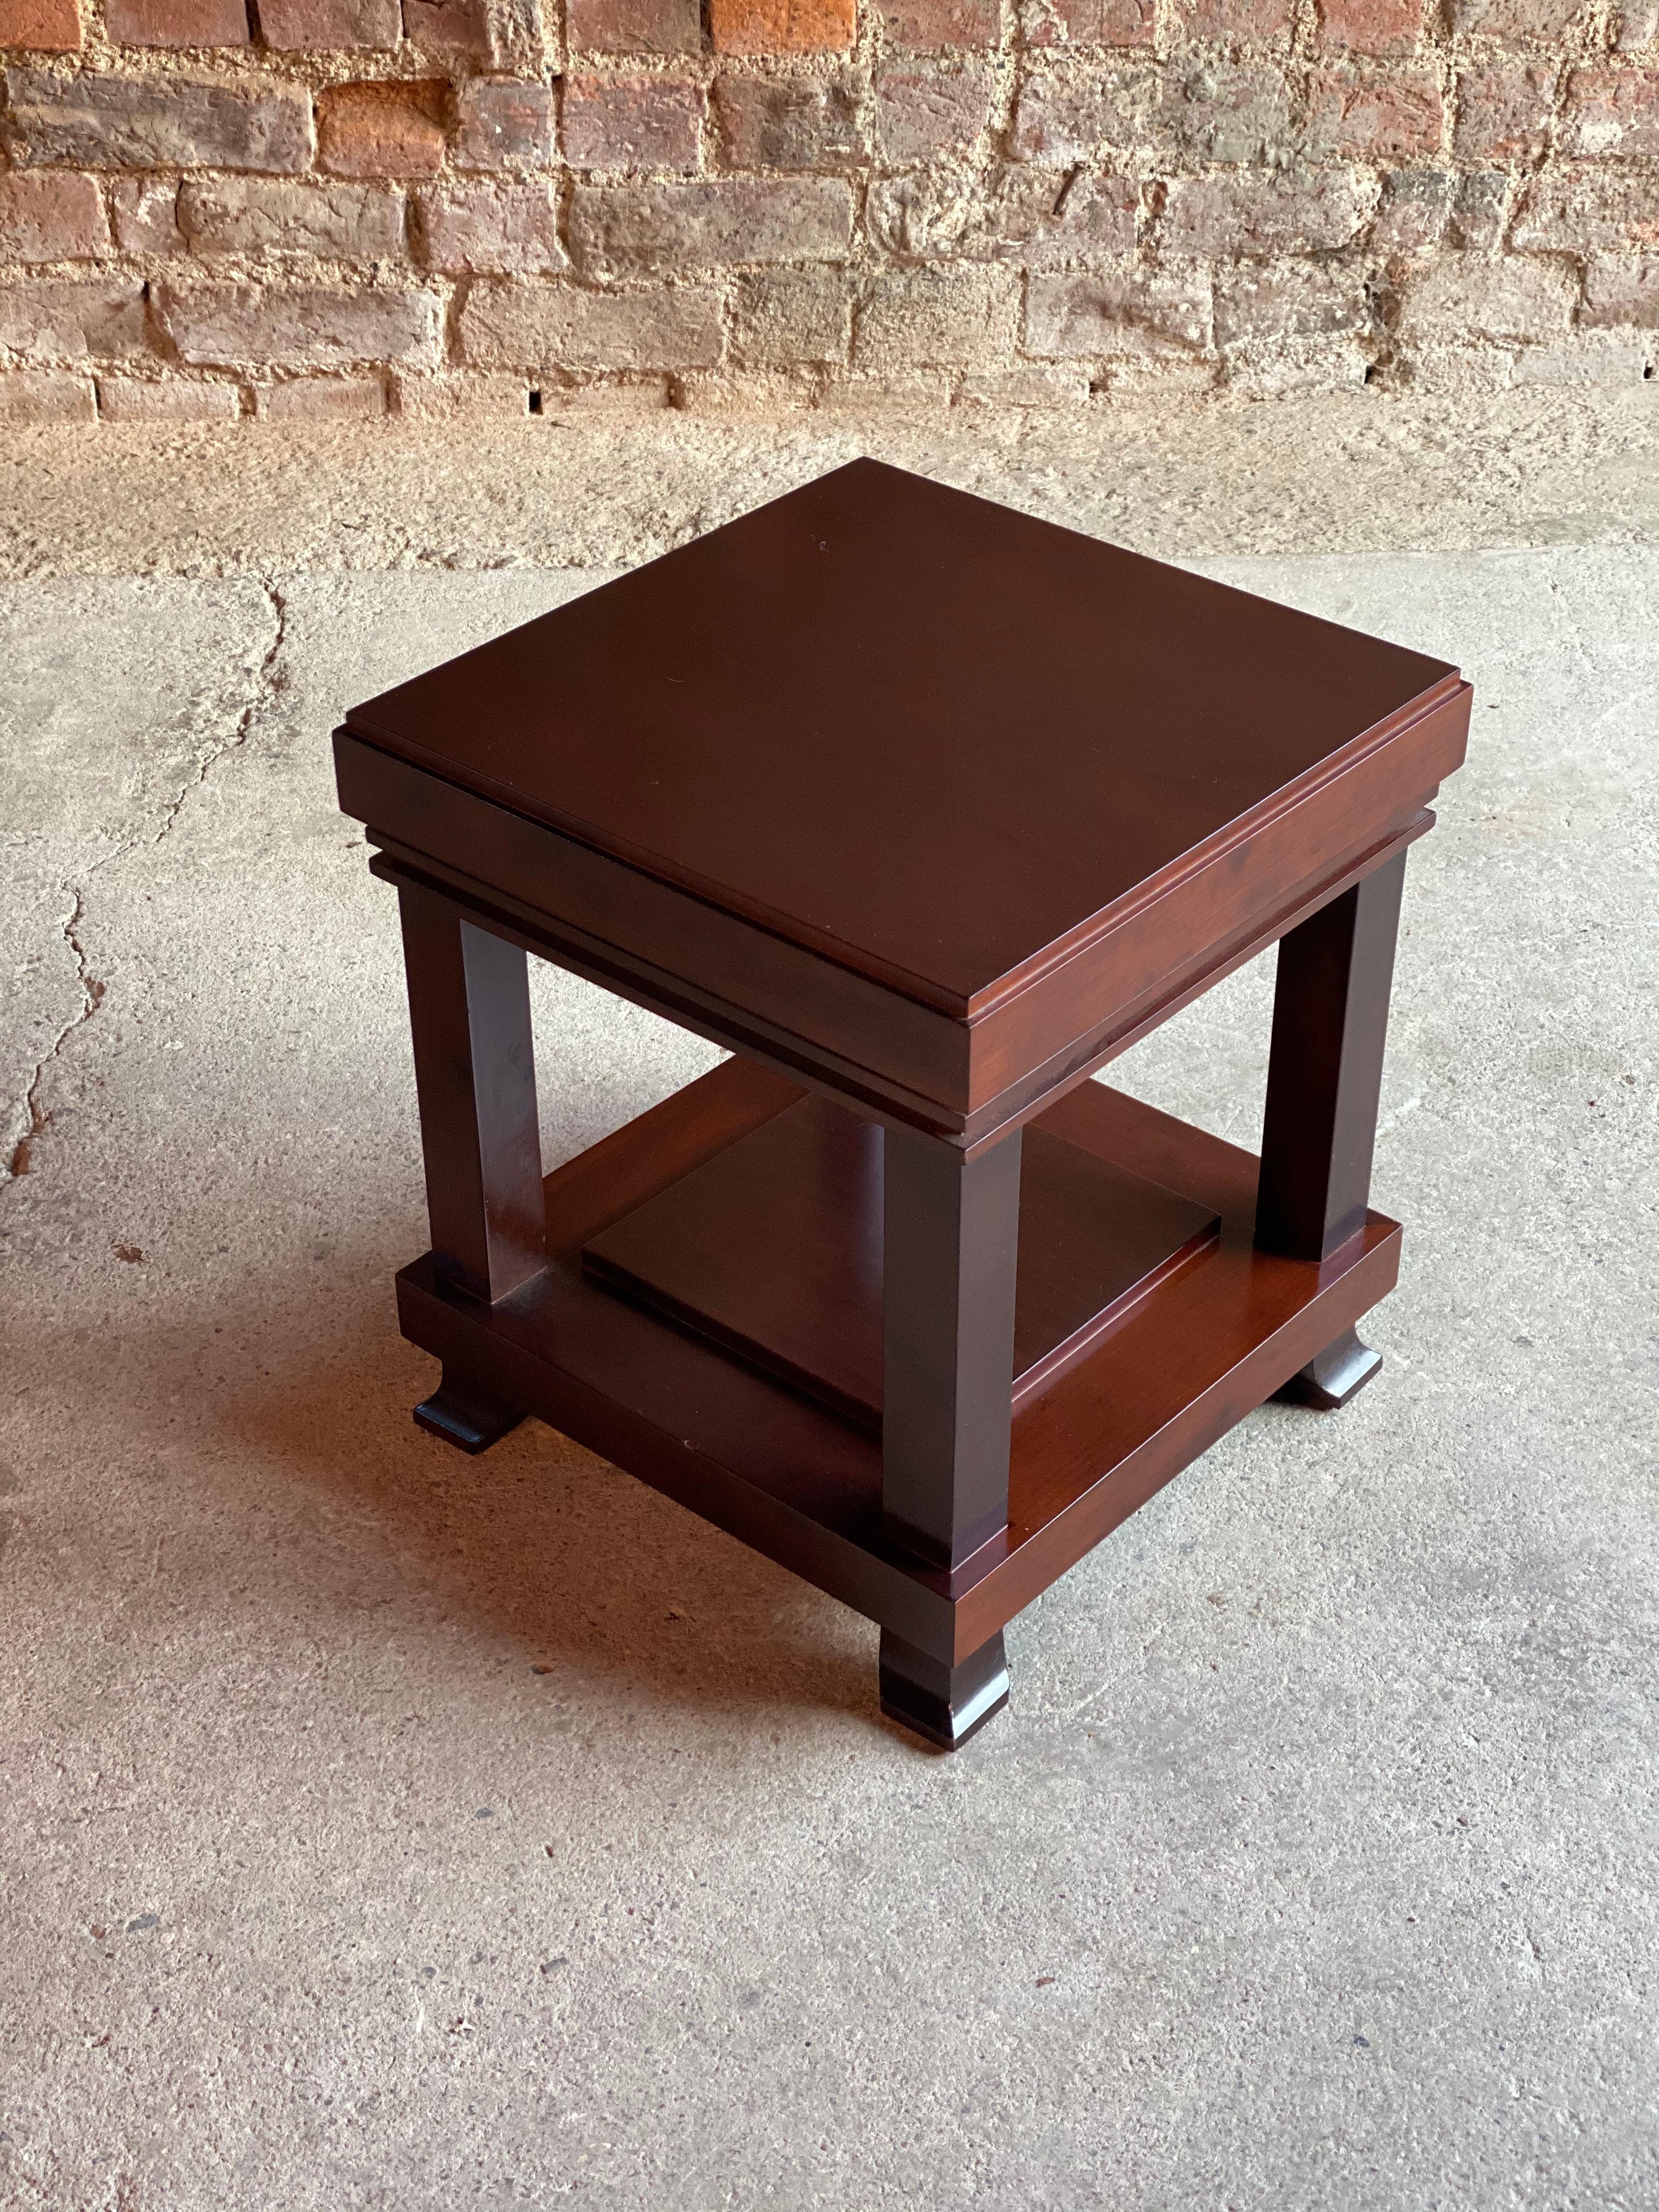 Late 20th Century Frank Lloyd Wright ‘Robie’ Side Tables or Stools Manufactured by Cassina